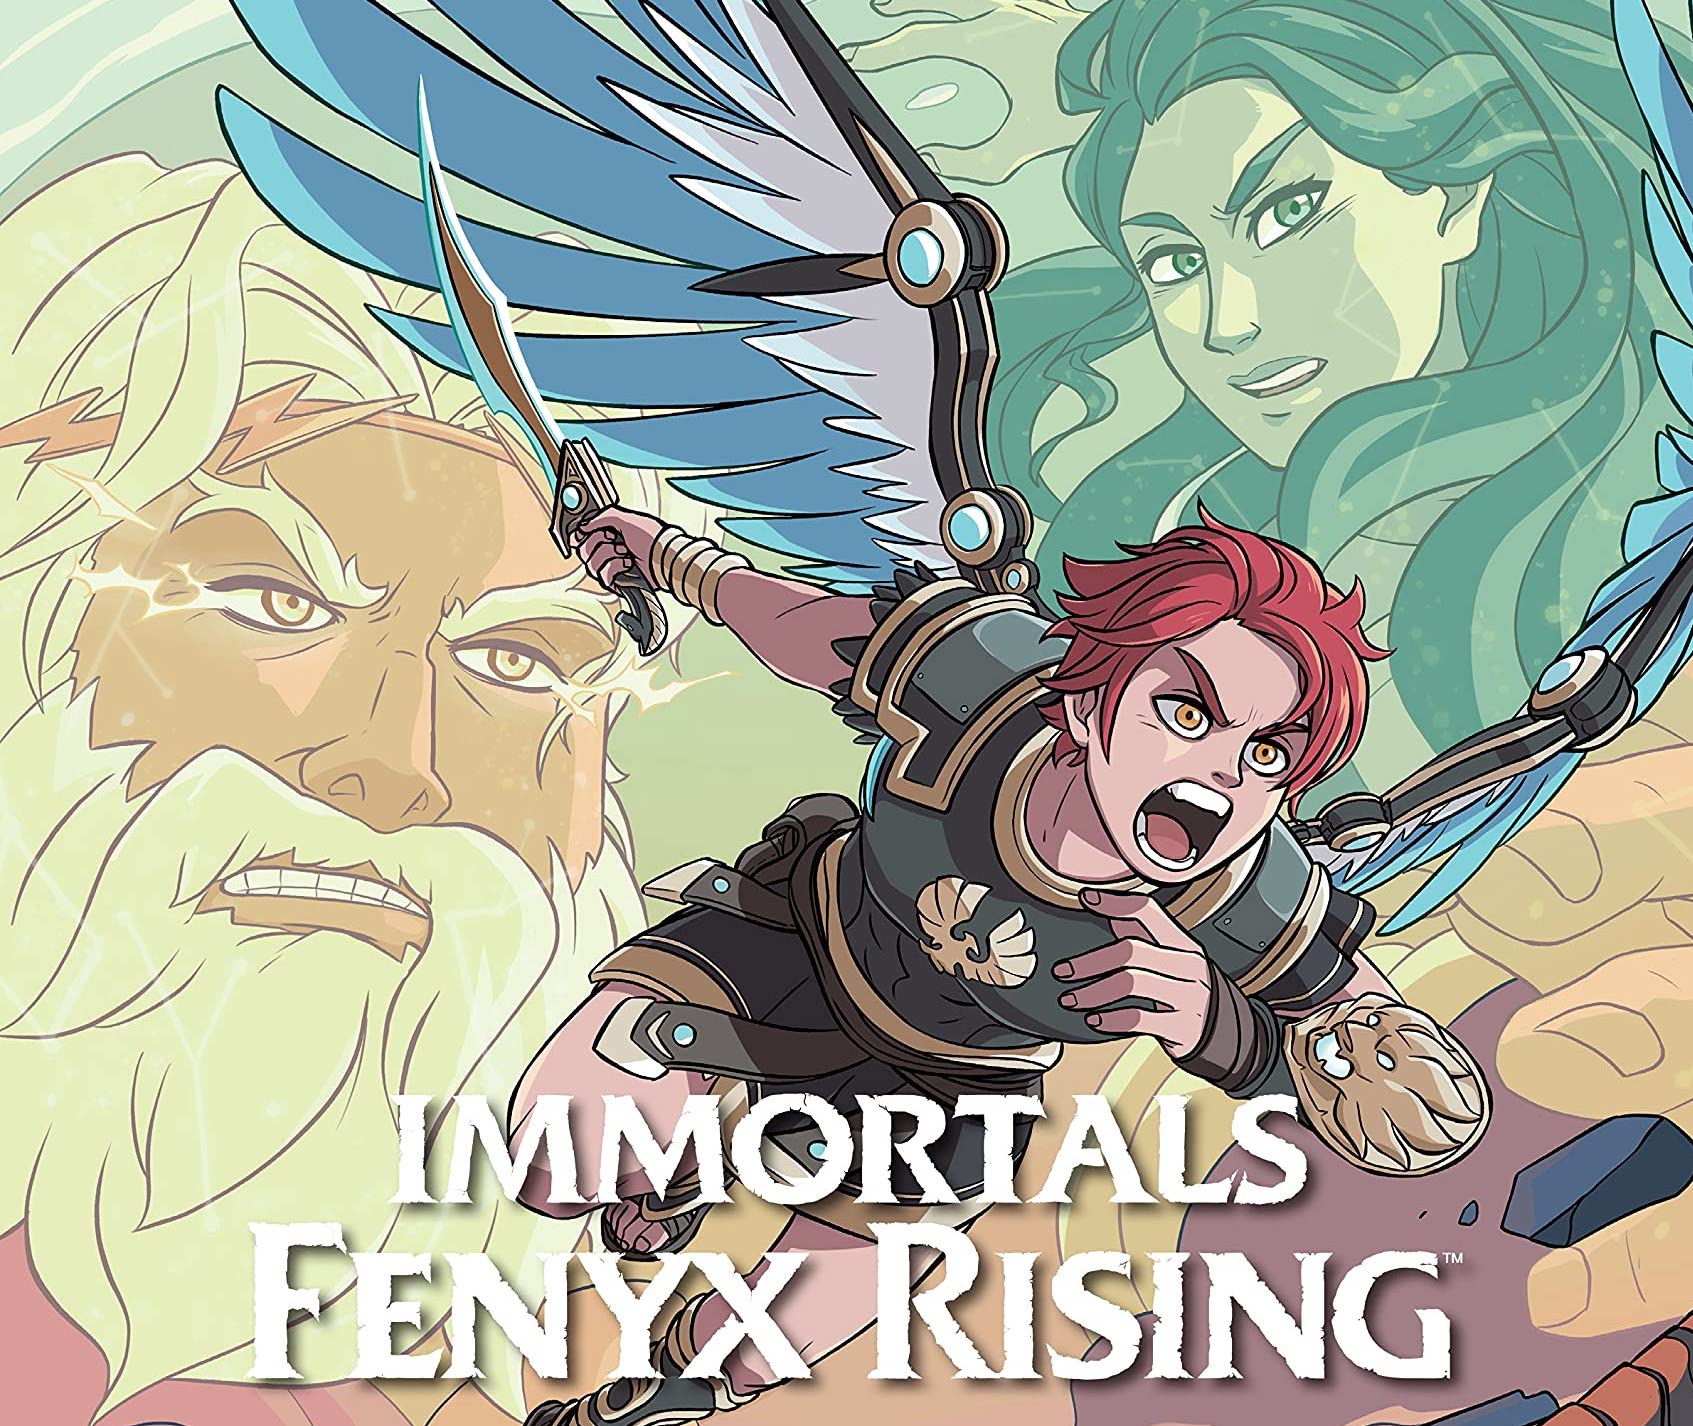 EXCLUSIVE Dark Horse Preview: Immortals Fenyx Rising: From Great Beginnings